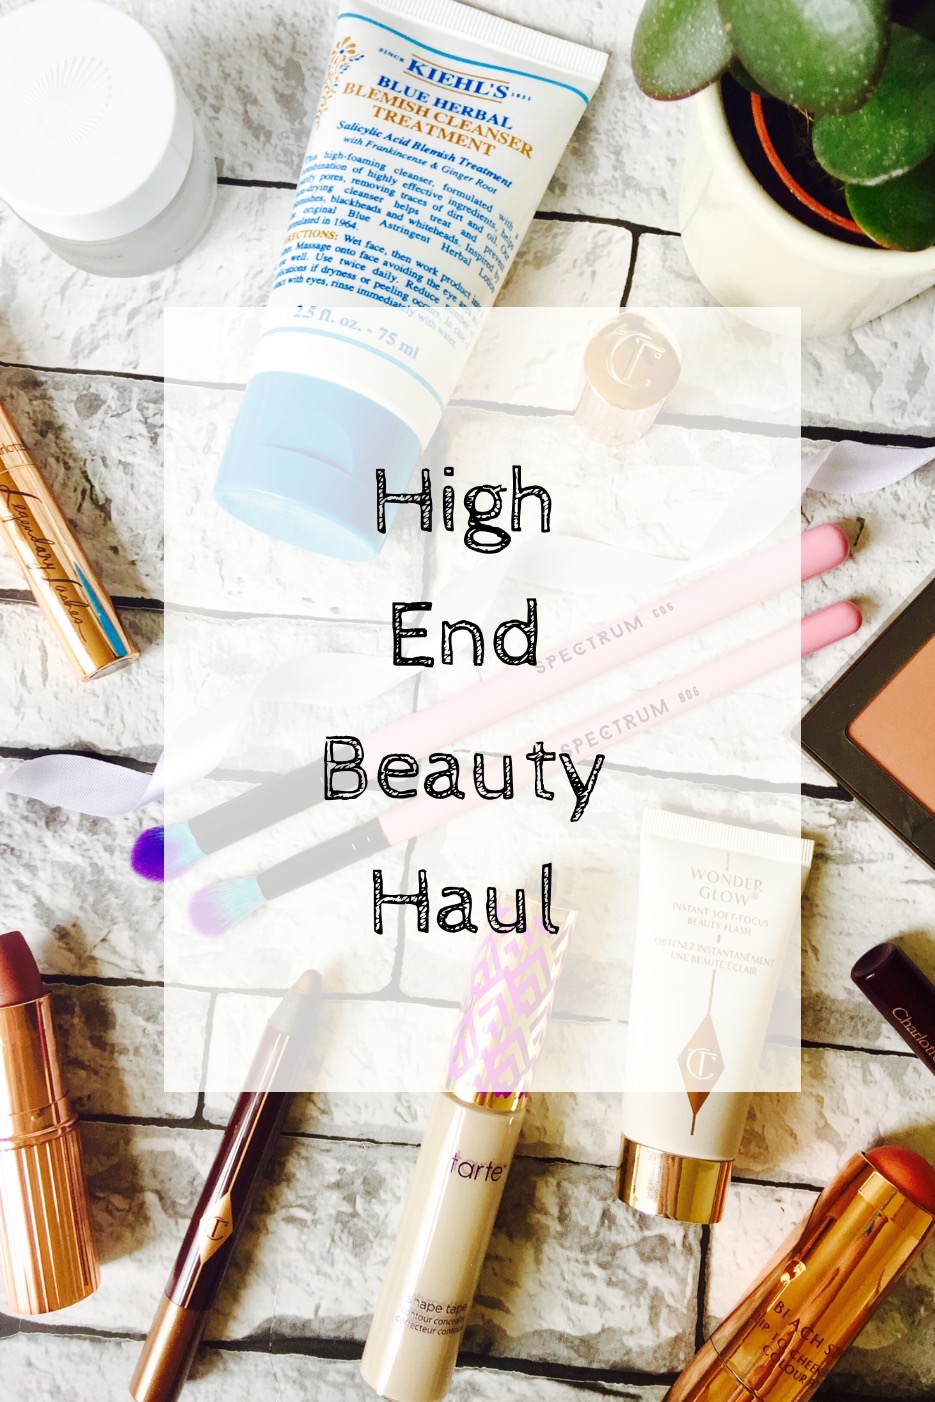 High End Beauty Haul Spectrum Collections Charlotte Tilbury Urban Decay Kiehl's Omorovicza Tarte Shape Tape